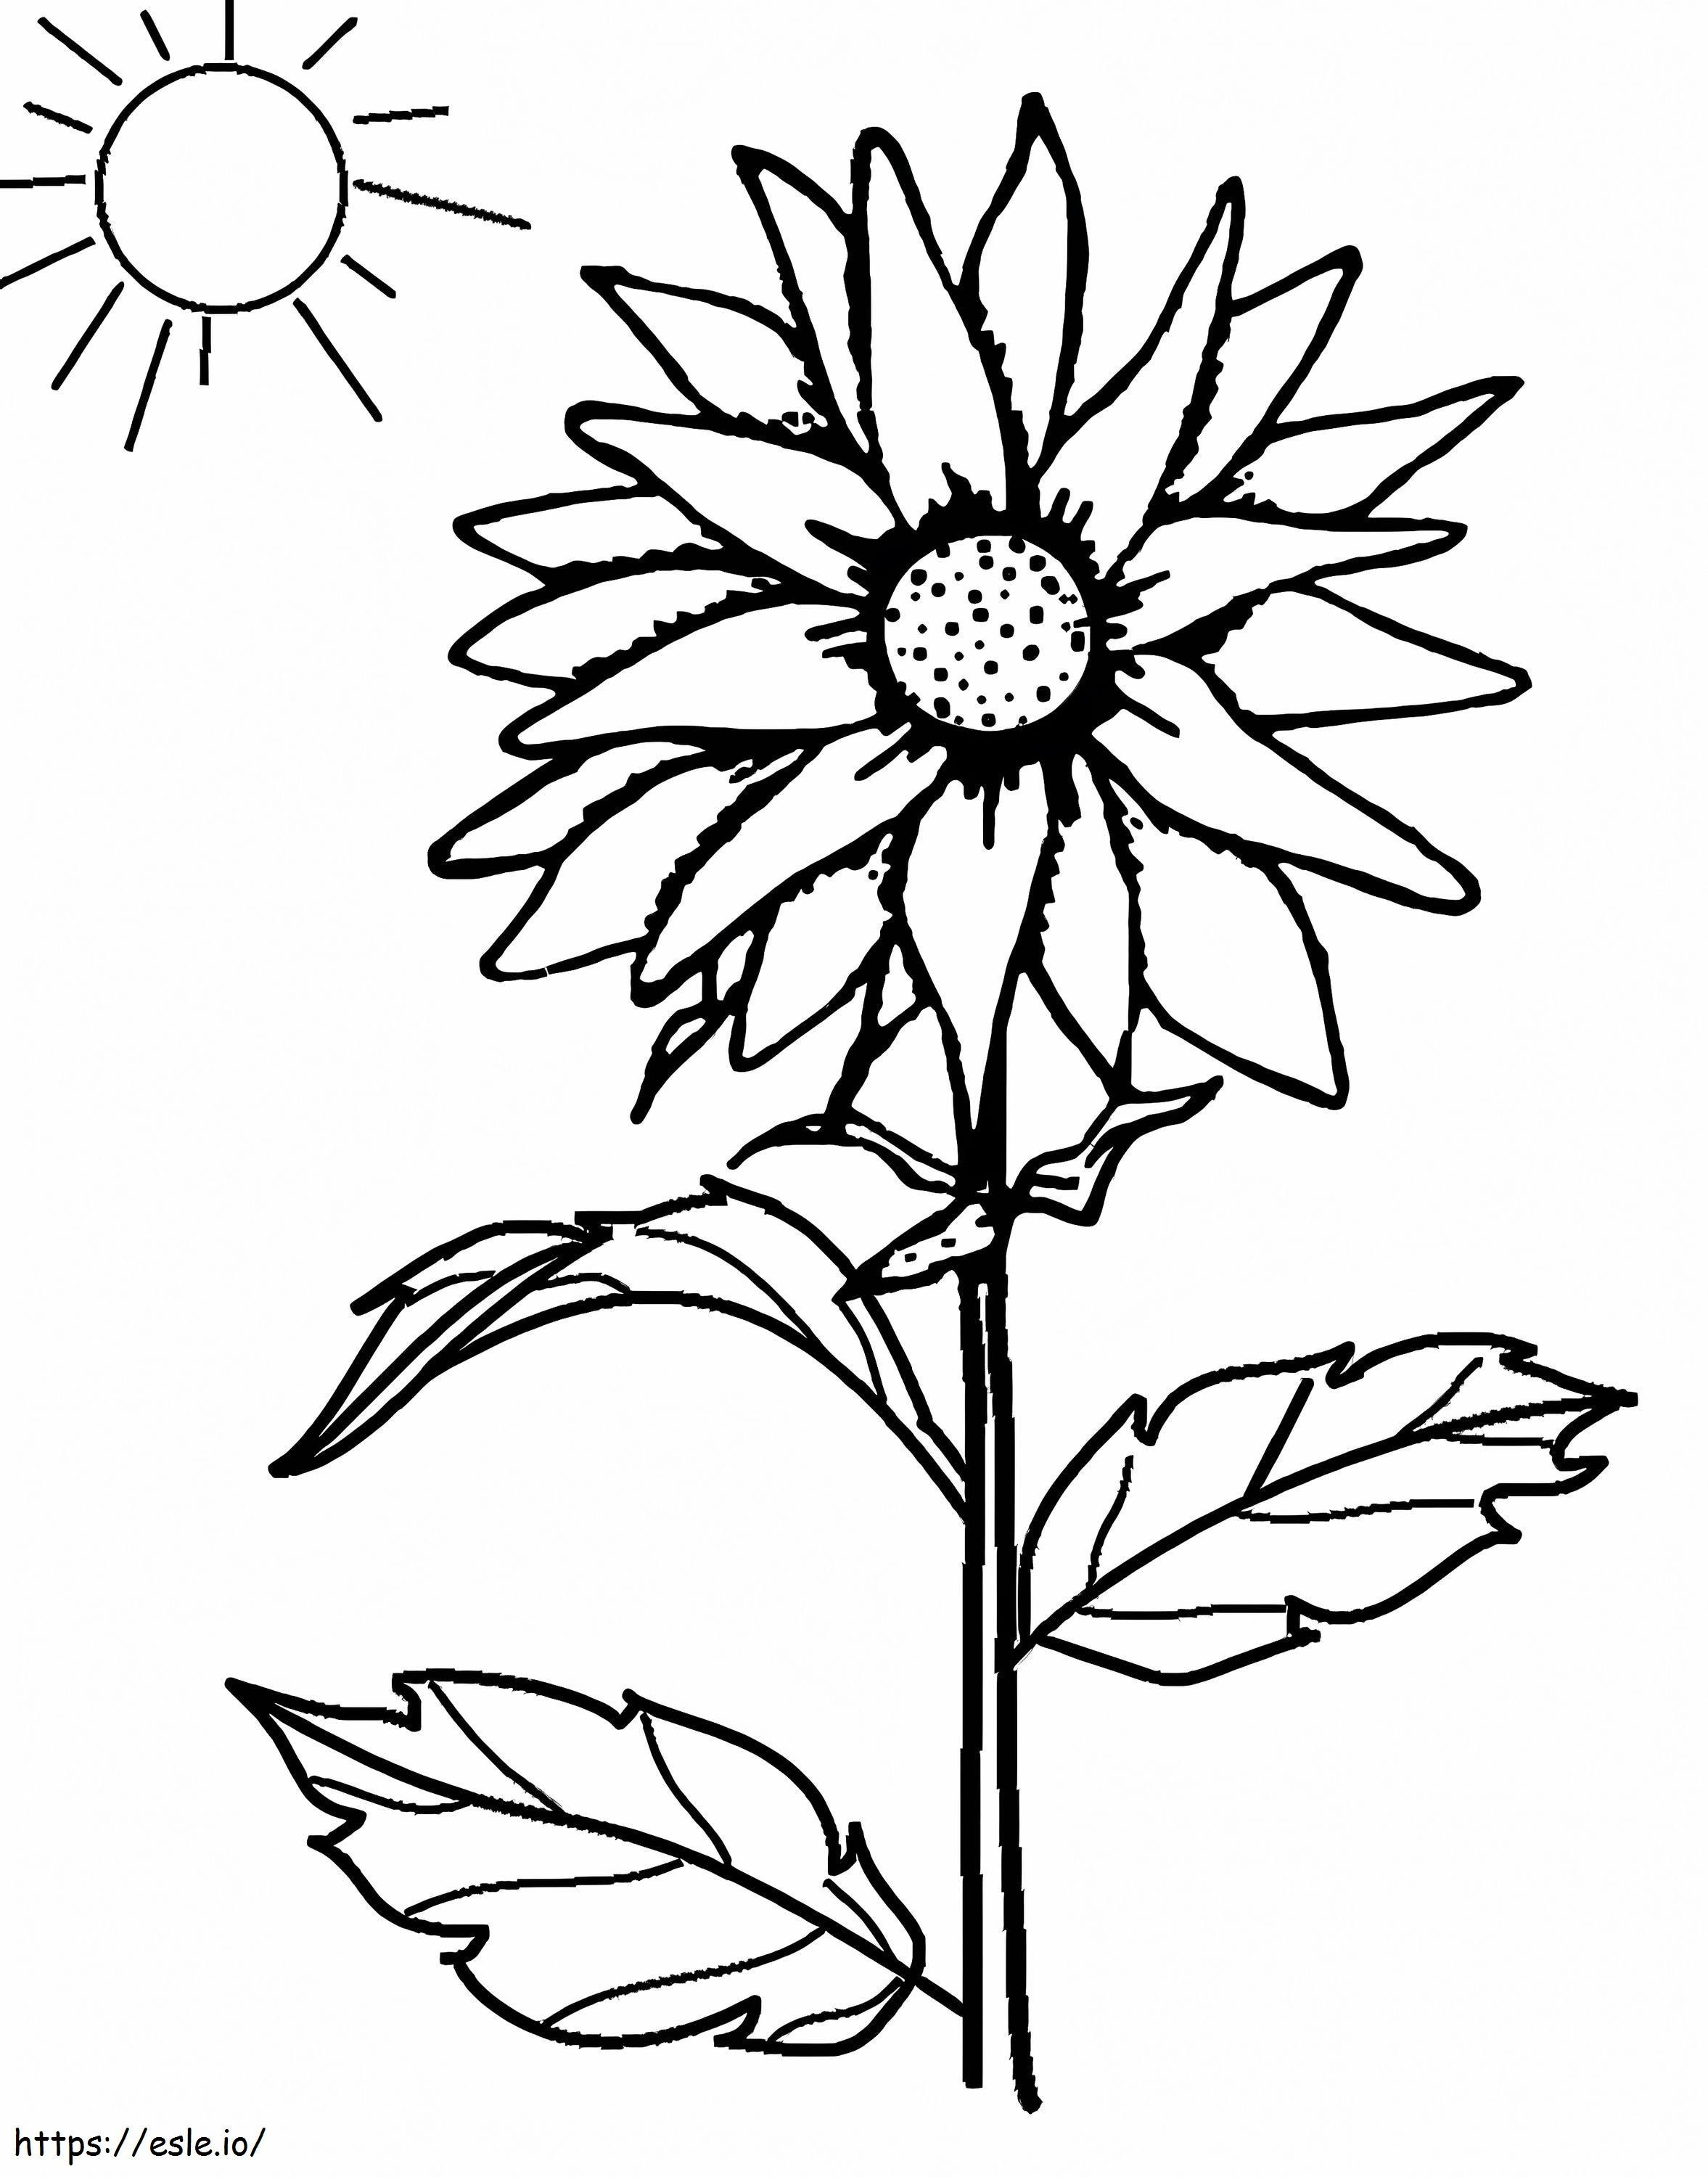 Sunflower And The Sun coloring page